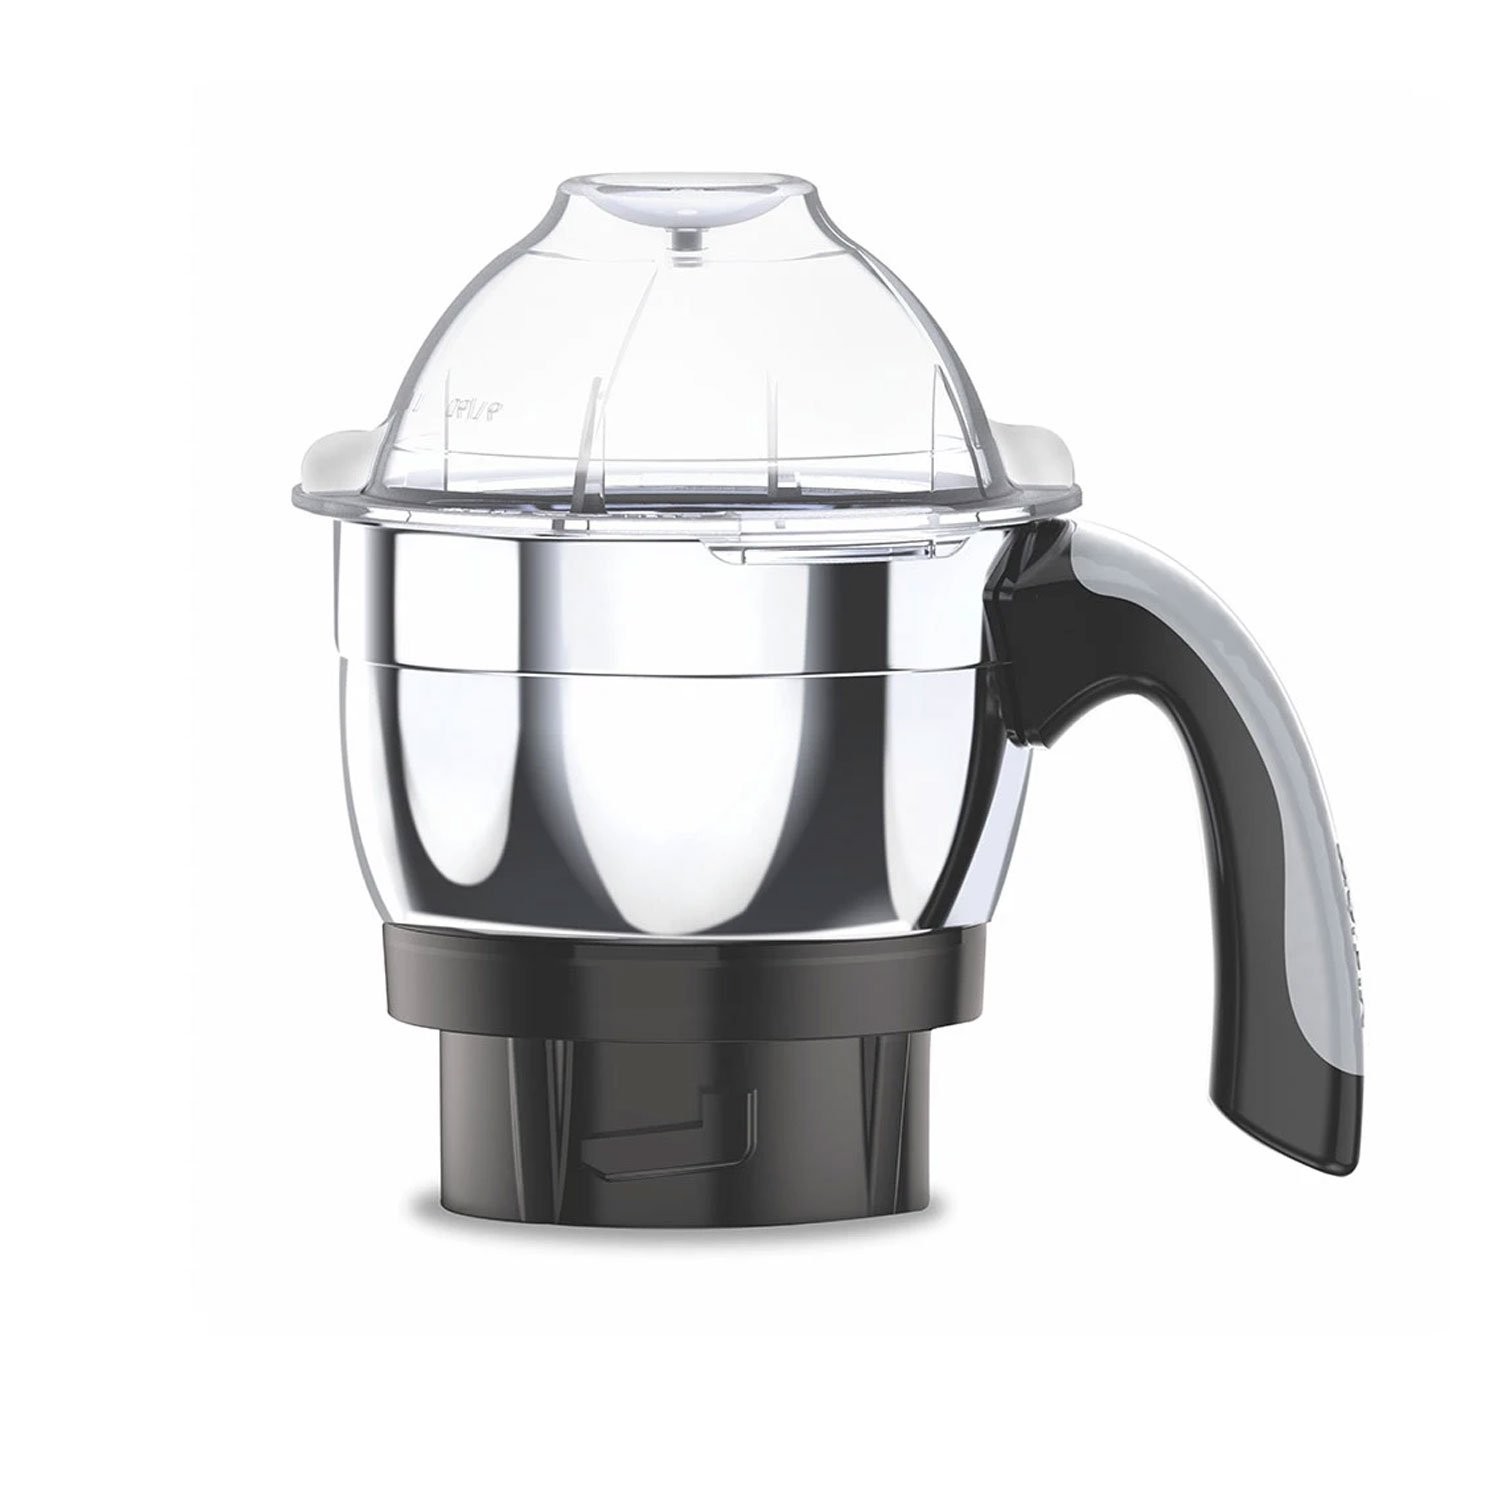 vidiem-eva-nero-650w-stainless-steel-jars-indian-mixer-grinder-spice-coffee-grinder-110v-for-use-in-canada-usa2